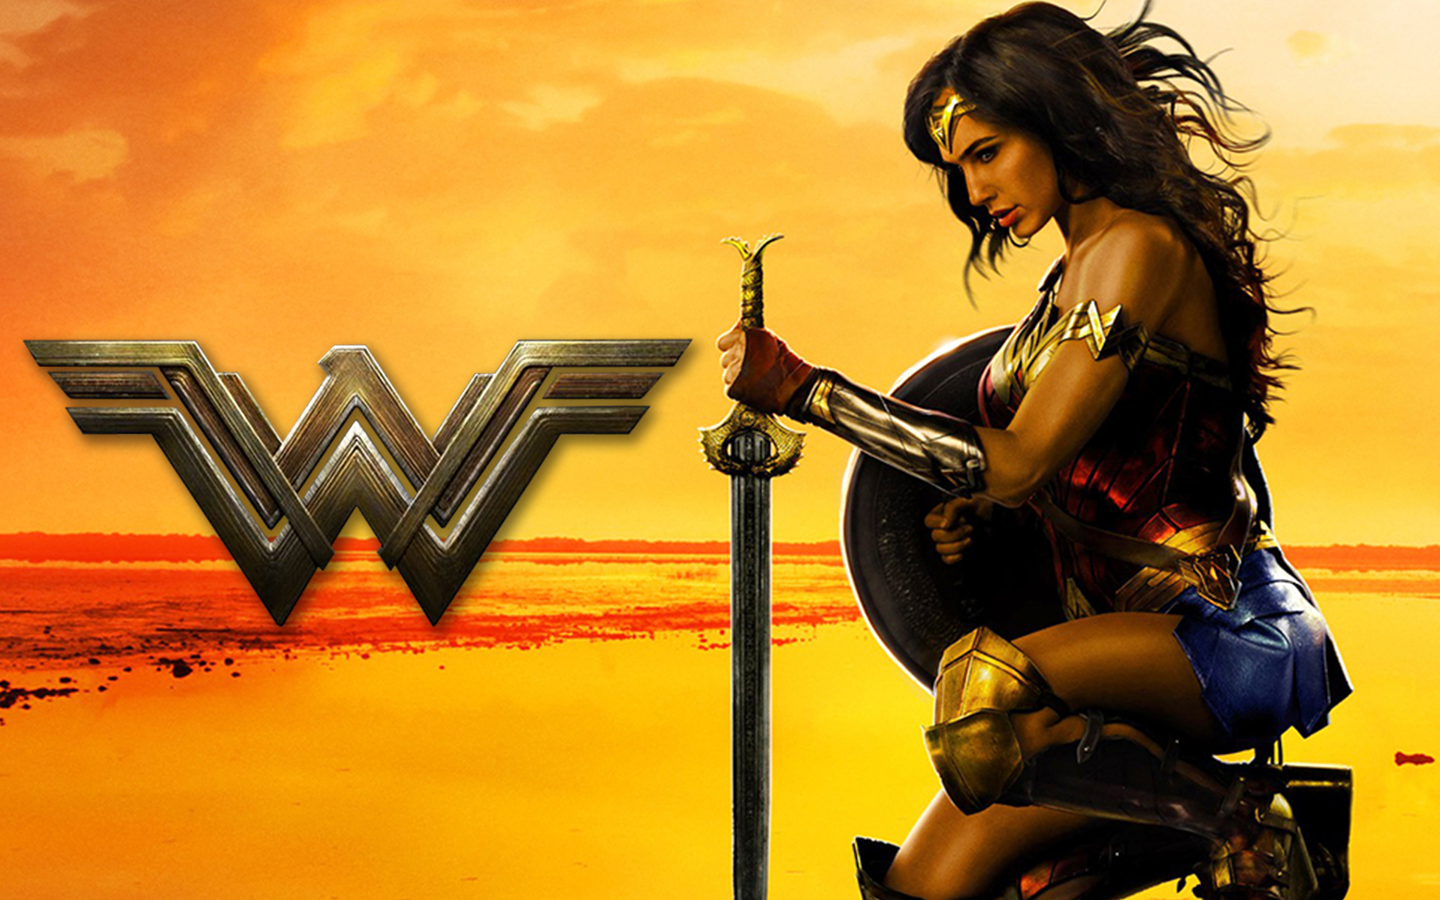 Warner Bros. Planning Oscar Push In Best Director and Best Picture Categories for ‘Wonder Woman’